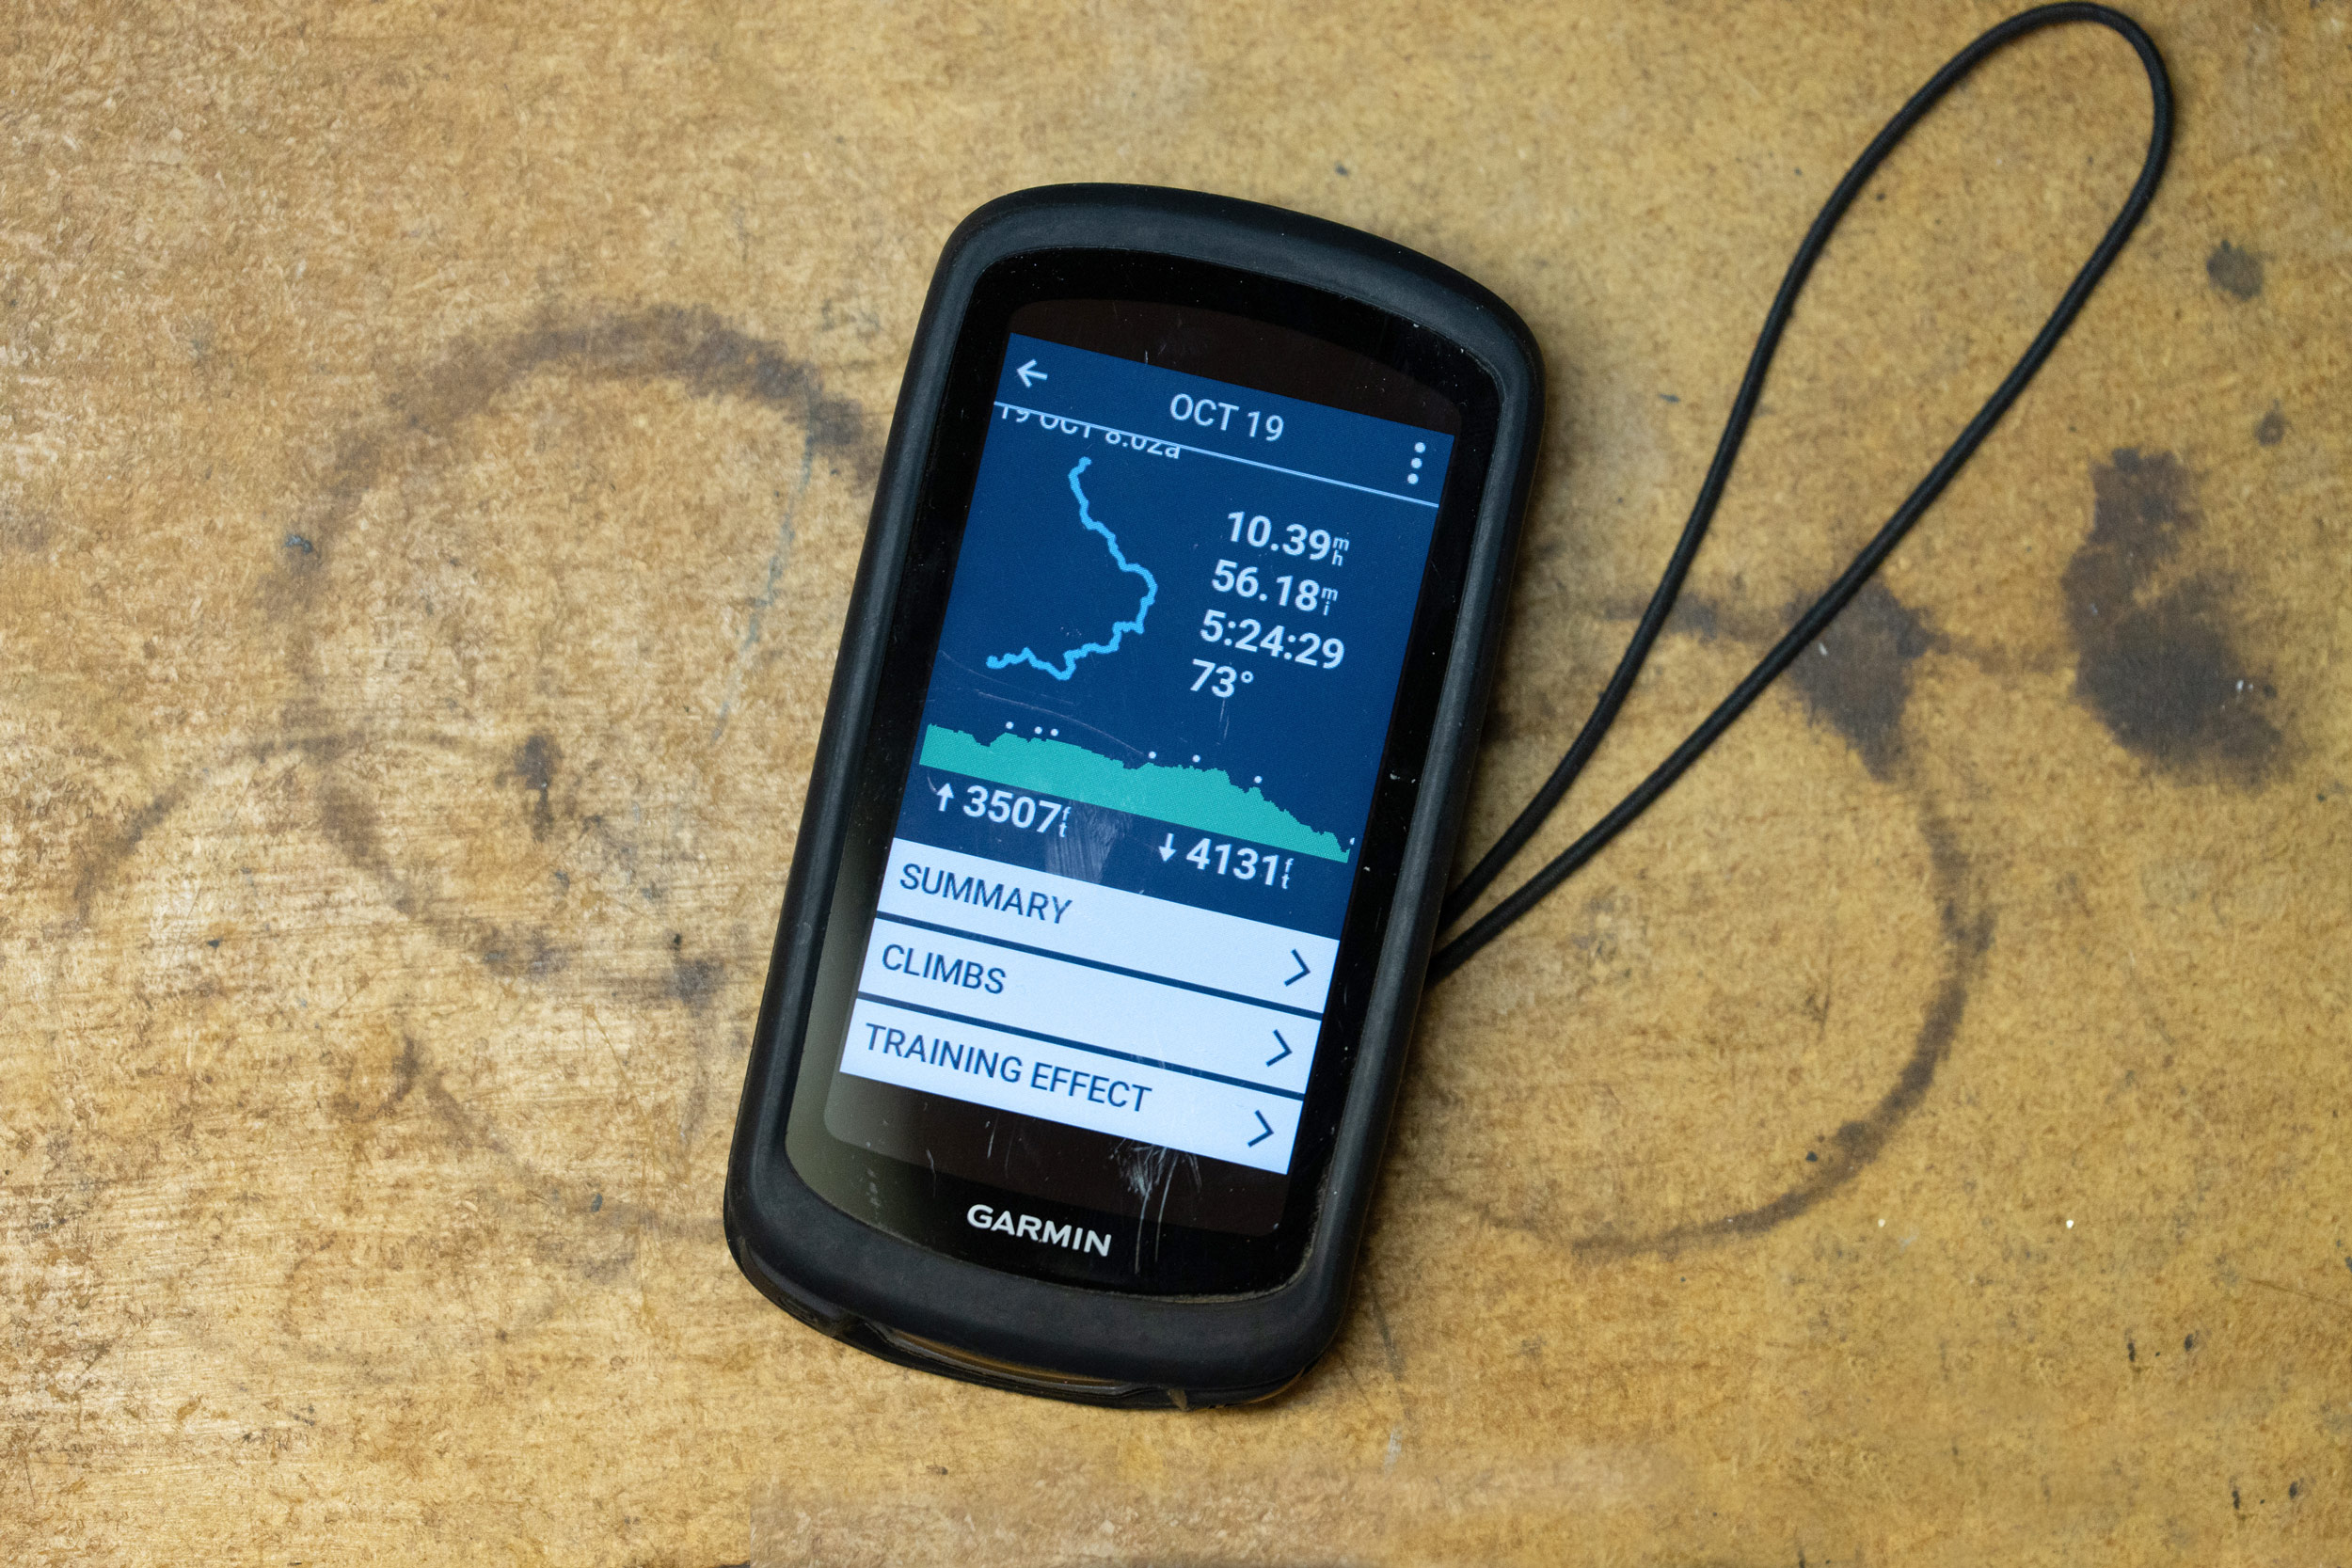 First Impressions: Garmin's new $750 Edge 1040 Solar is much more